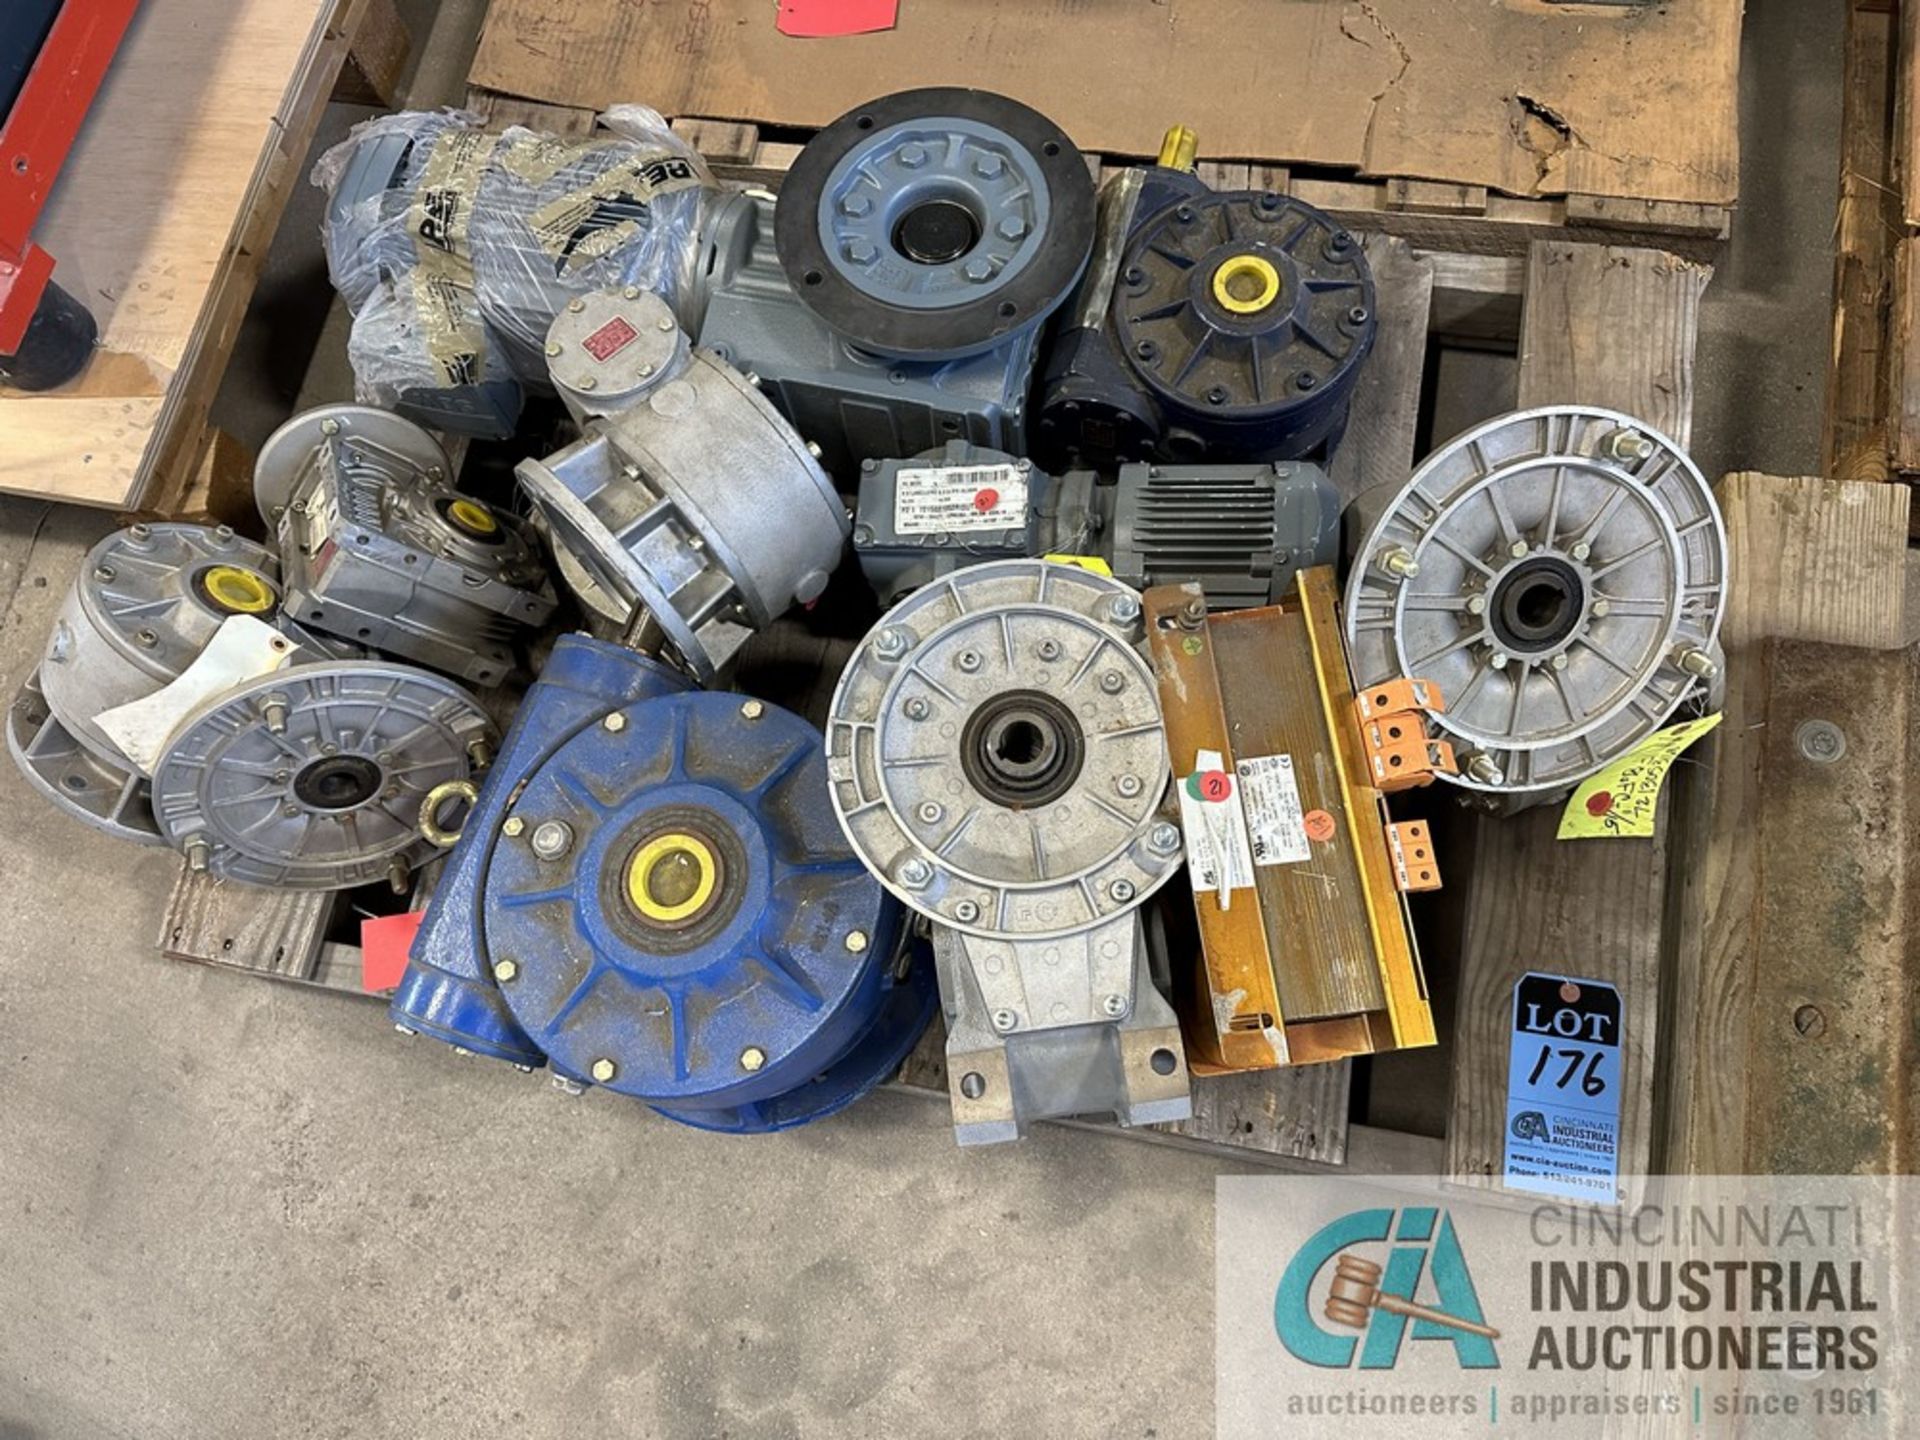 (LOT) (1) SKID WITH MISCELLANEOUS GEAR DRIVES